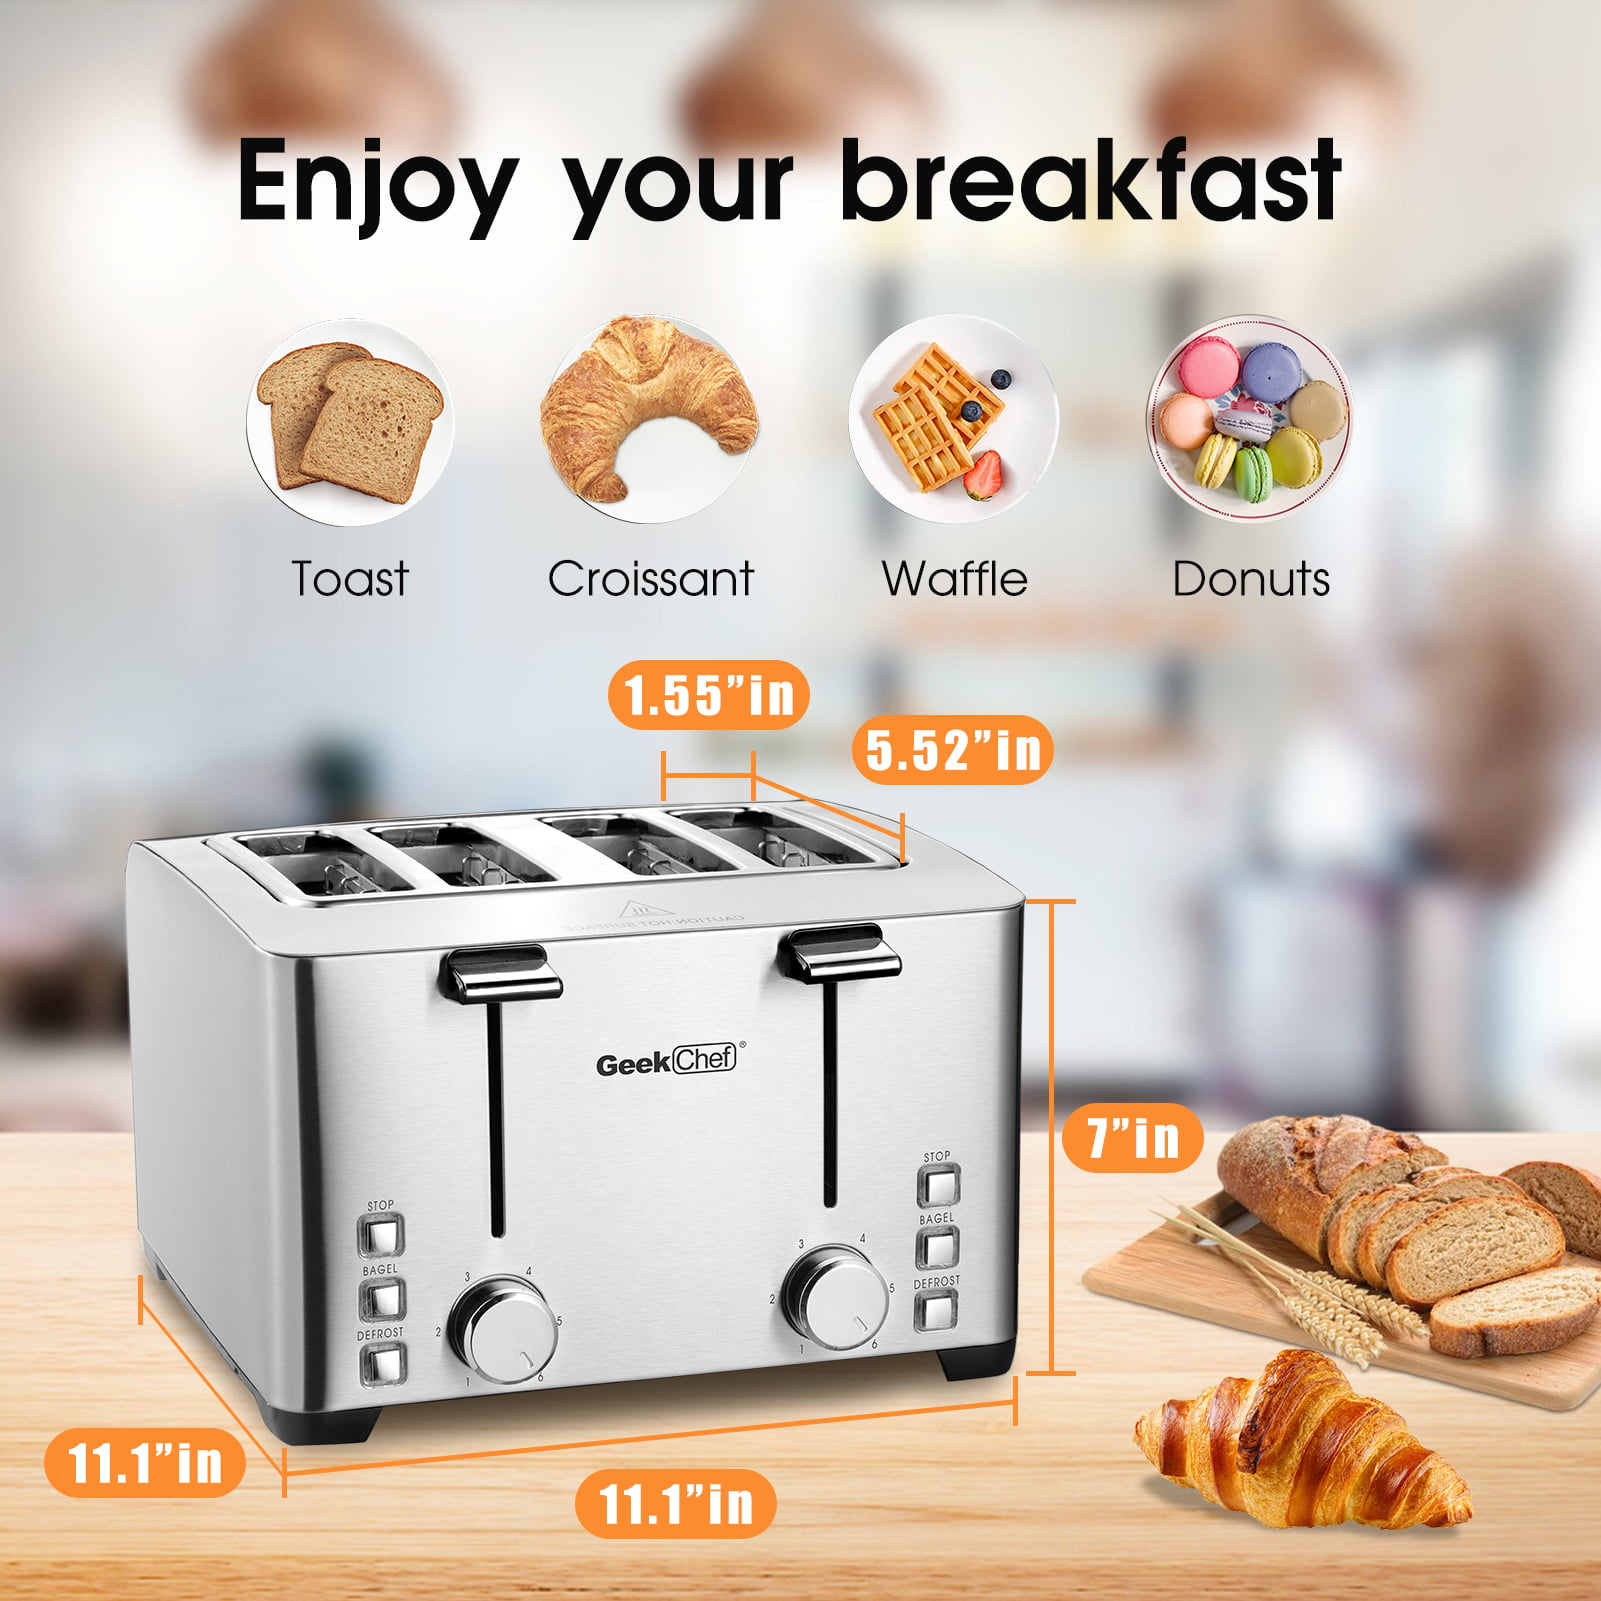 Toaster 4 Slice 1.6 Wide Slot Stainless Steel Toasters with Bagel, Reheat,  Cancel, Defrost Function, 6 Shade Settings, Removable Crumb Tray, 1550W